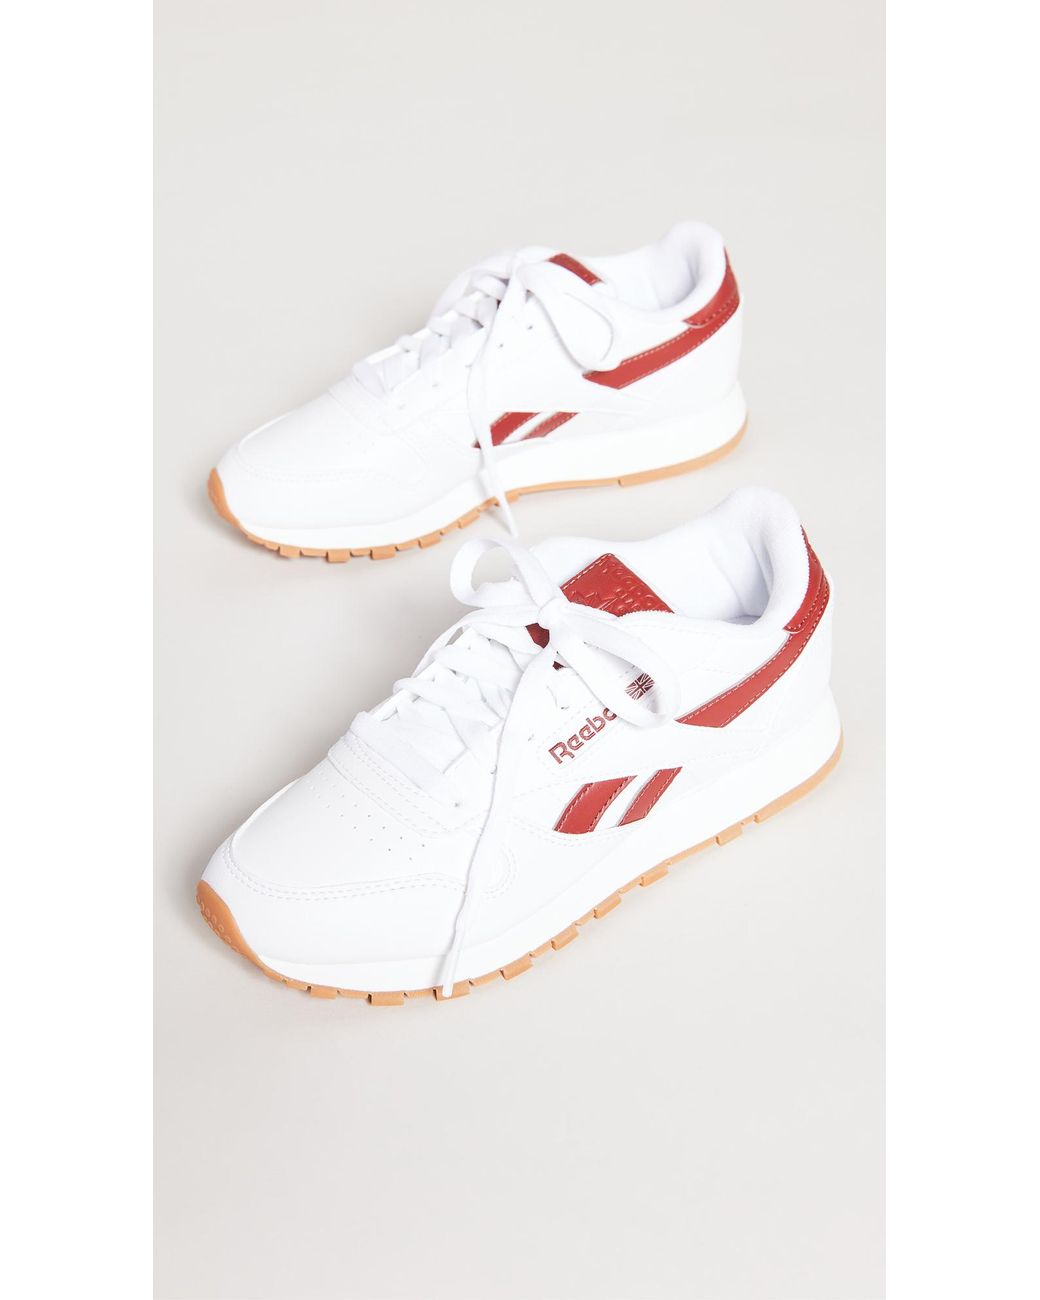 Reebok Classic Leather Vegan Sneakers in White | Lyst Canada